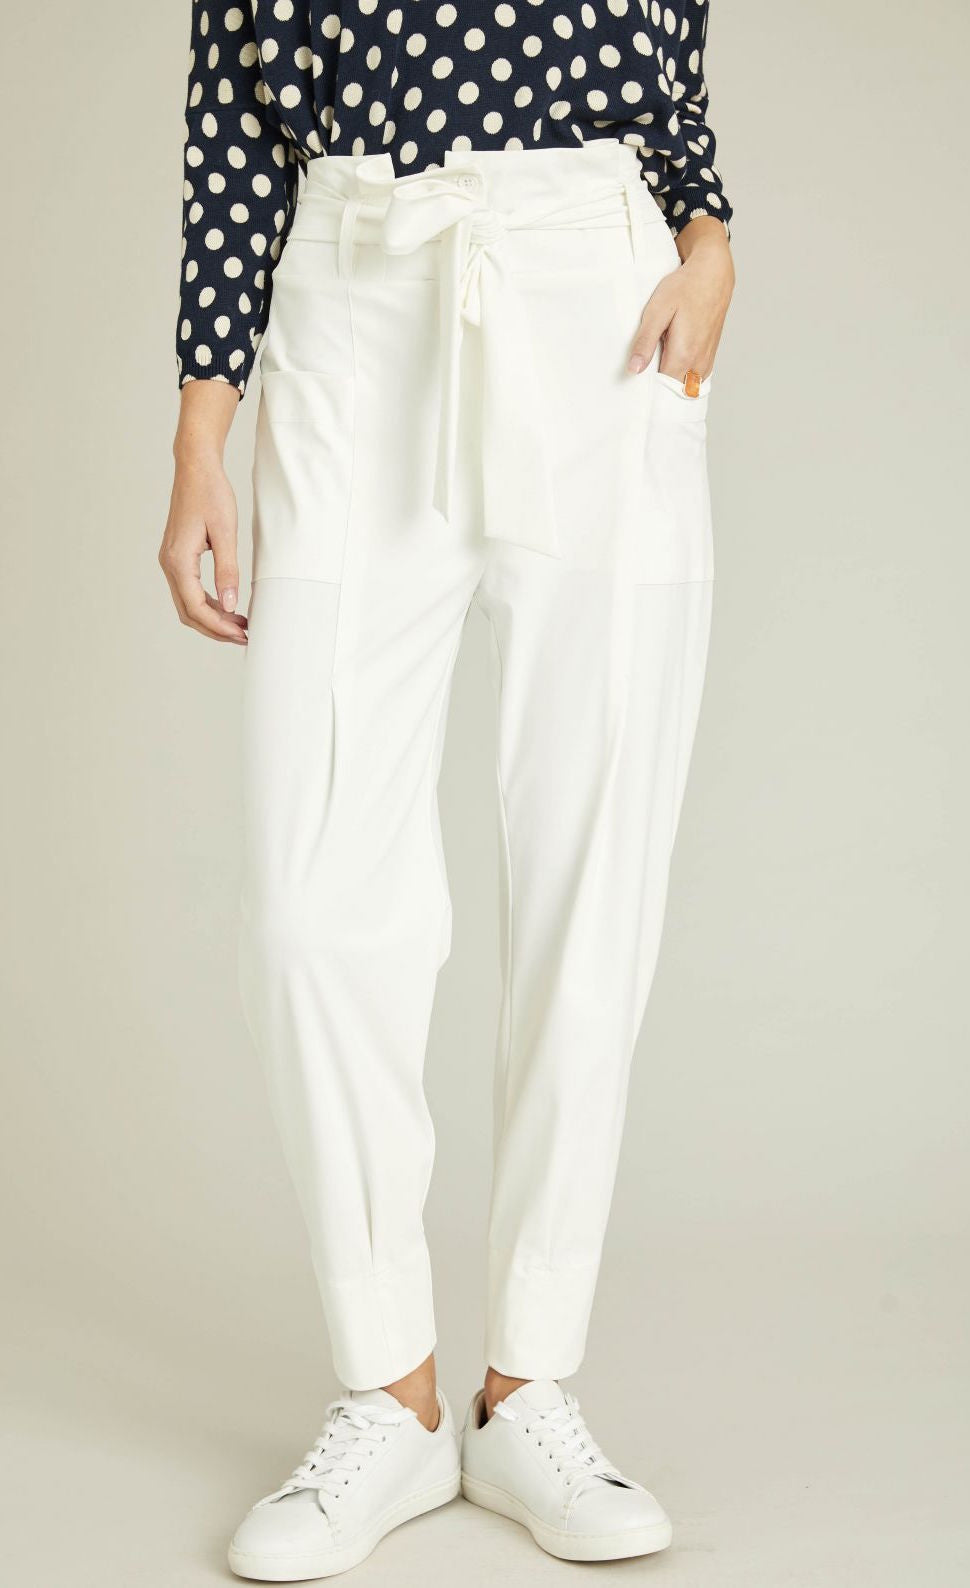 Front bottom half view of a woman wearing a blue and white polka dot top and the indies white collin pants. These pants have a carrot shape, two front patch pockets, and a tie belt.